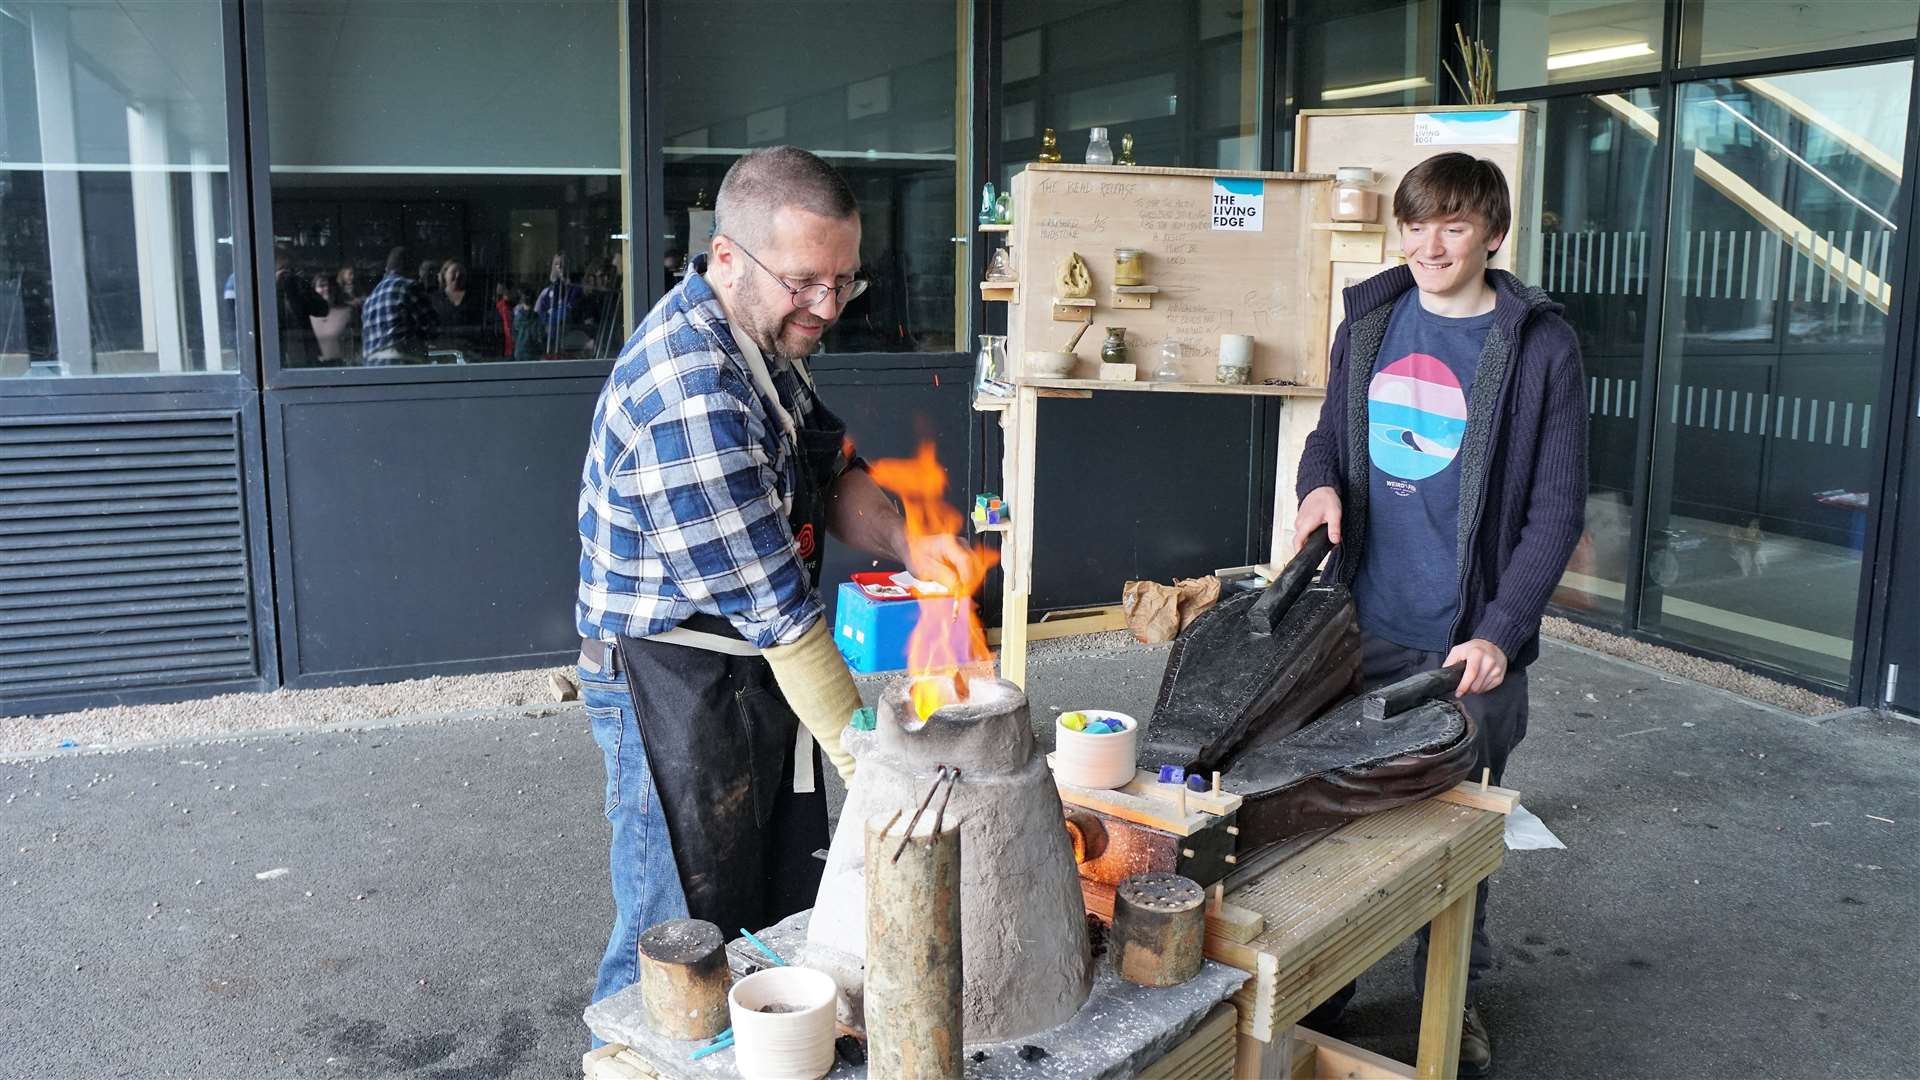 Glass artist Michael Bullen had a special furnace and was trying to recreate the patterned glass bead recovered in an archaeological dig at Swartigill this year. His son Will is helping operate the bellows for the furnace. Picture: DGS